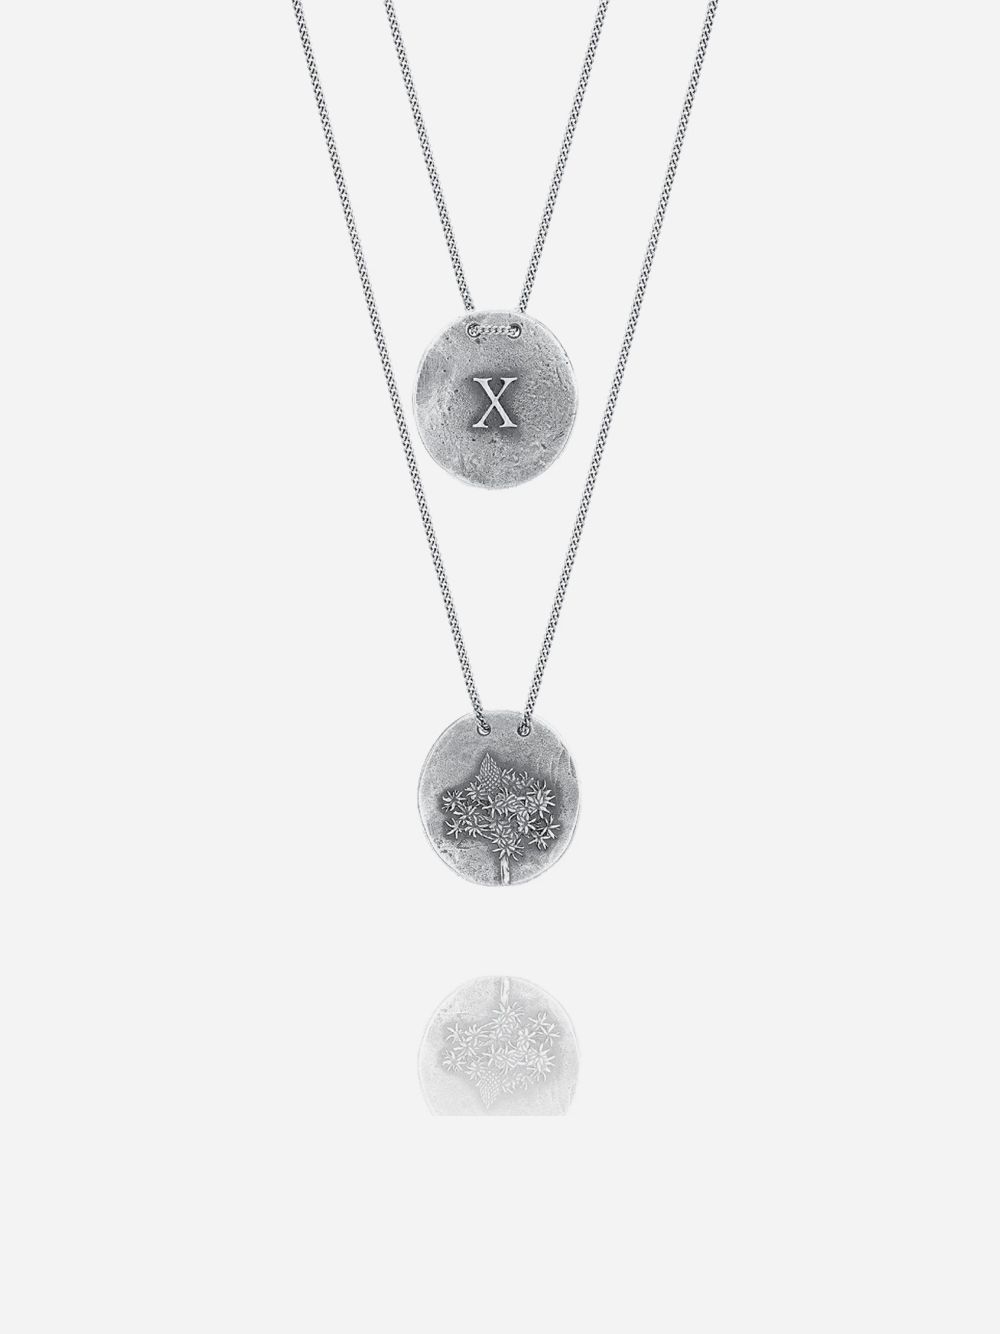 Silver X Necklace